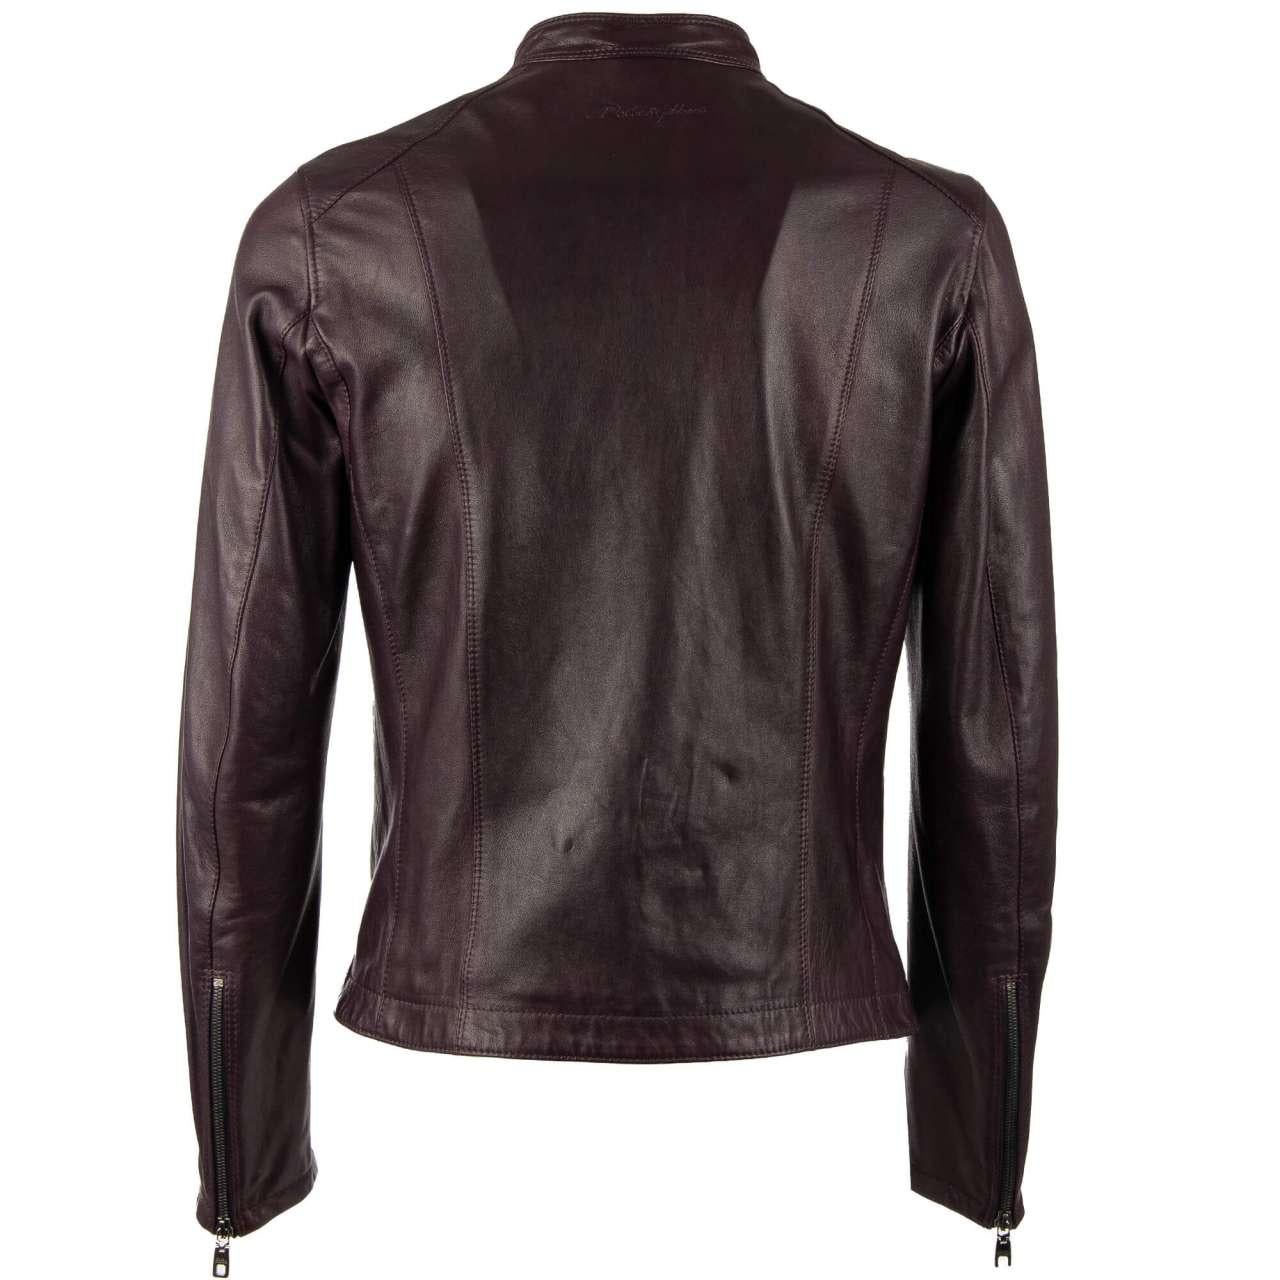 Dolce & Gabbana - Nappa Leather Biker Jacket with Pockets Purple 48 In Excellent Condition For Sale In Erkrath, DE